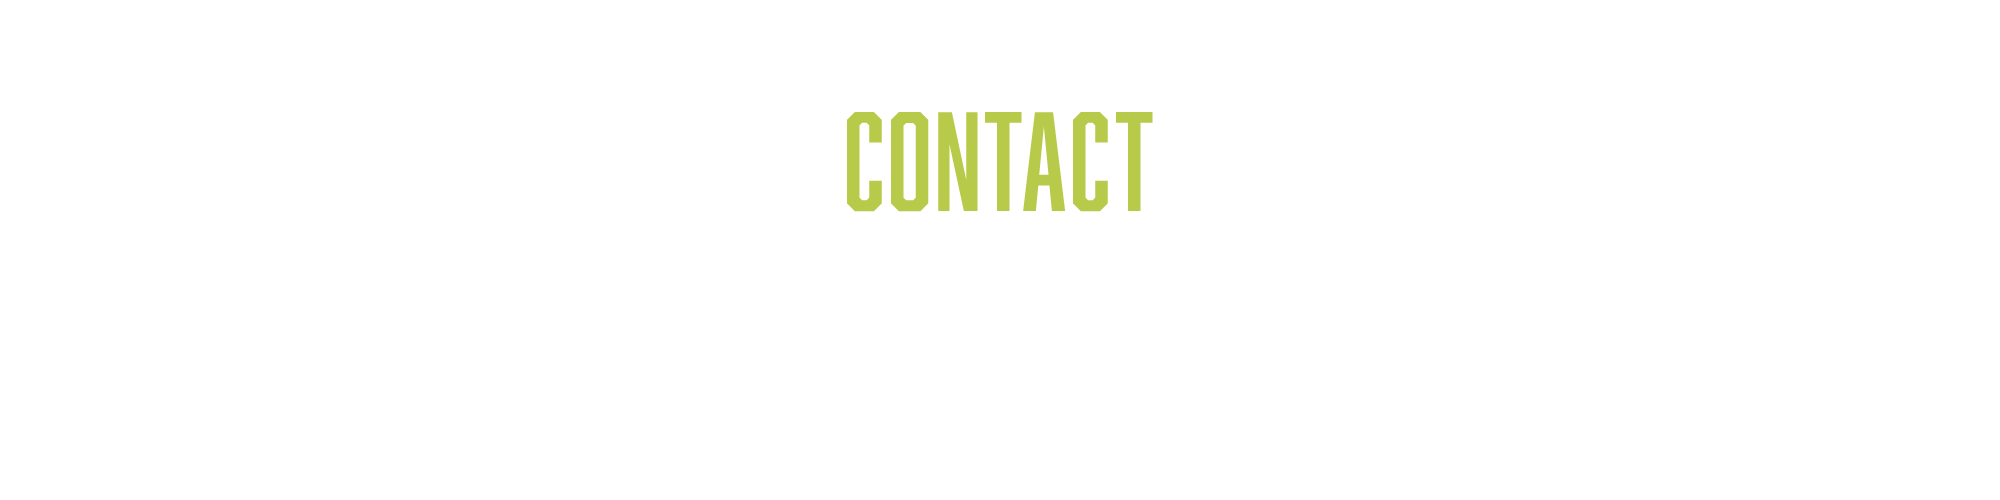 bnr_contact_off